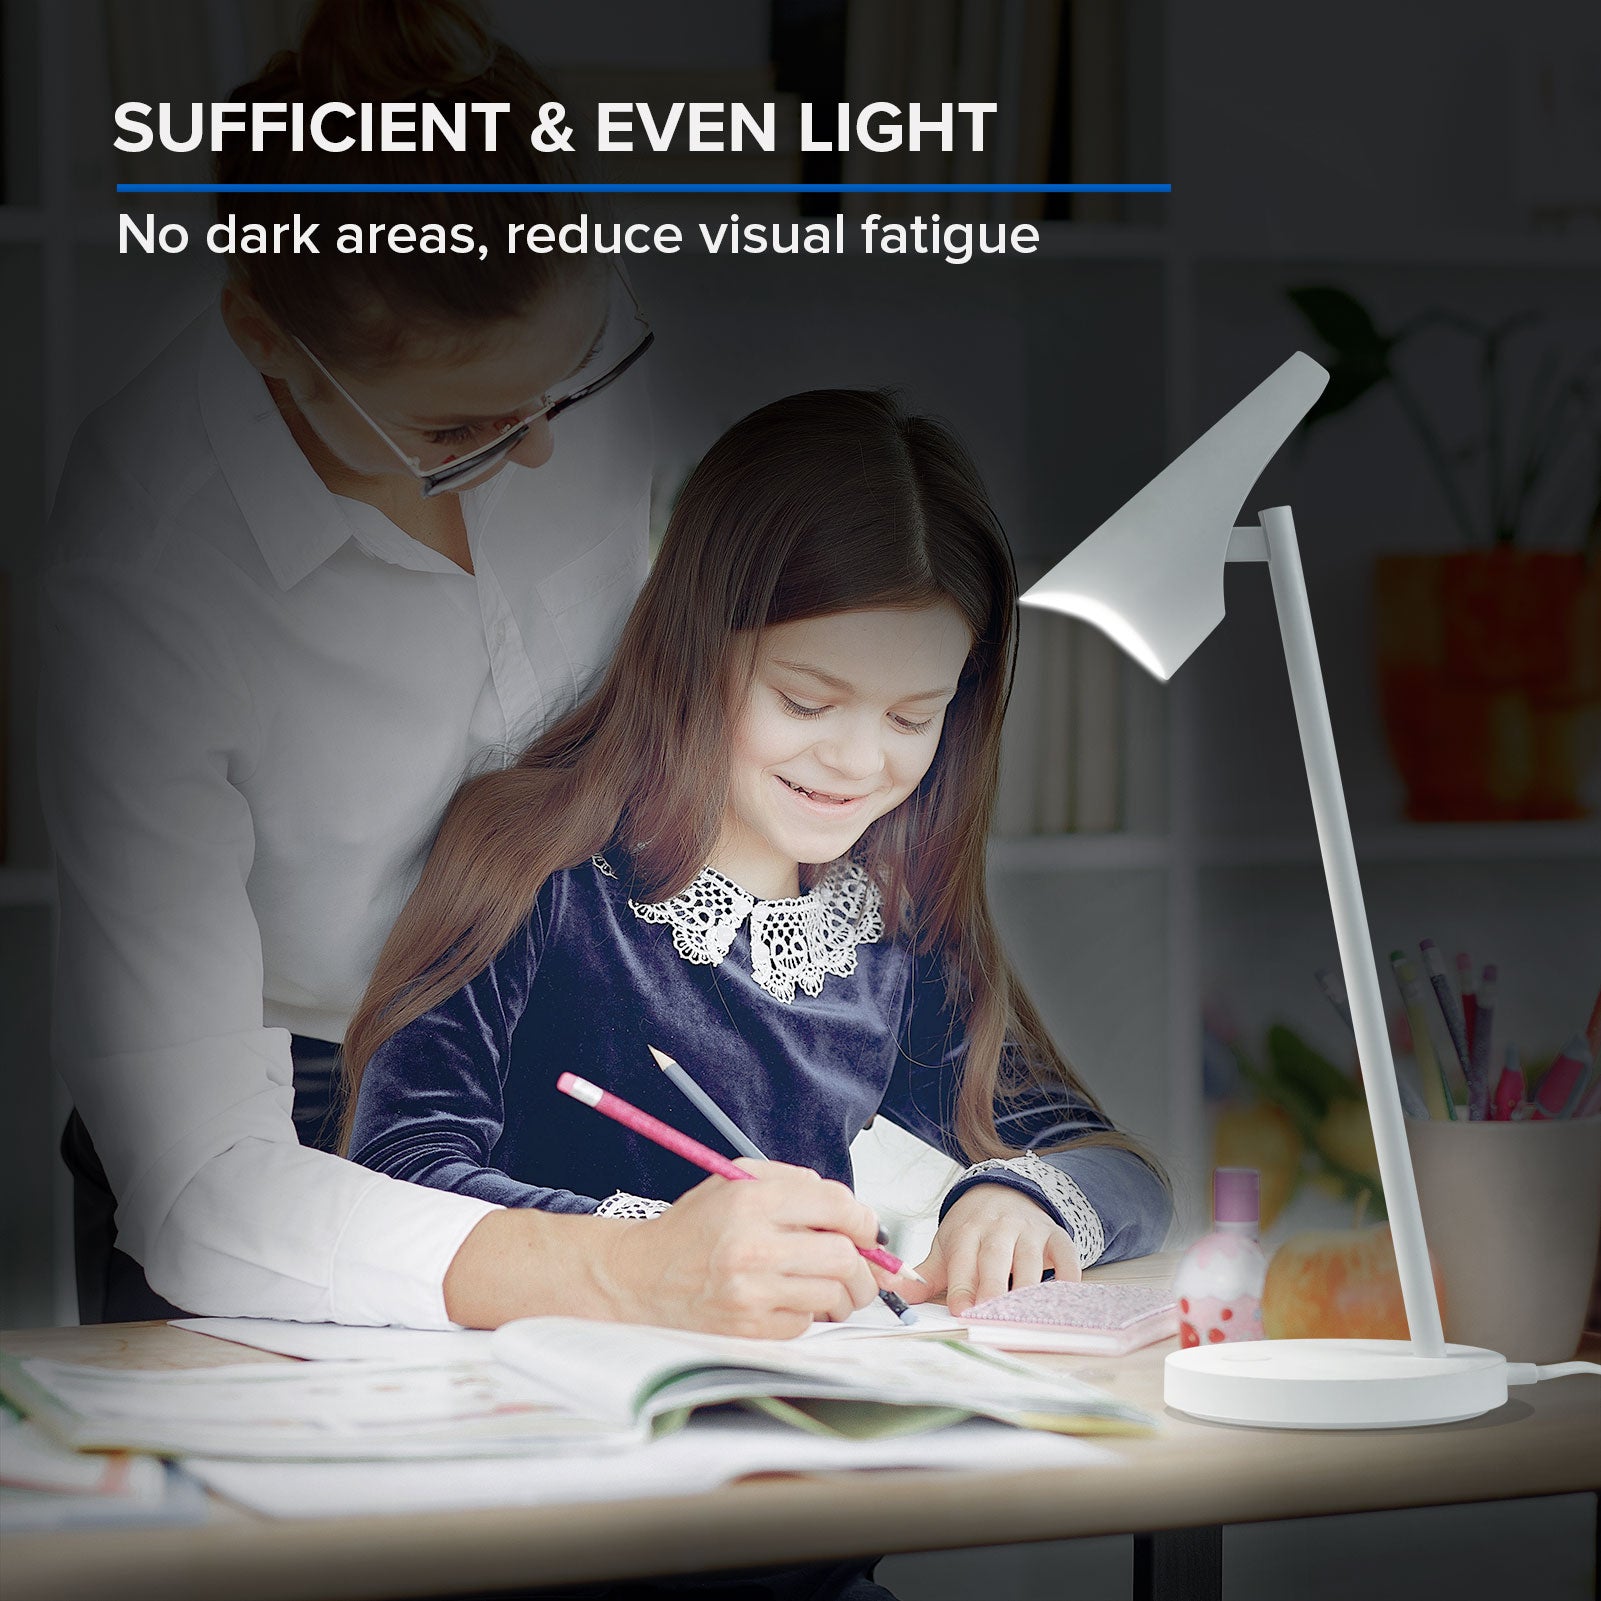 6W LED Desk Lamp (US ONLY) is sufficient，even light，no dark areas and reduce visual fatigue.